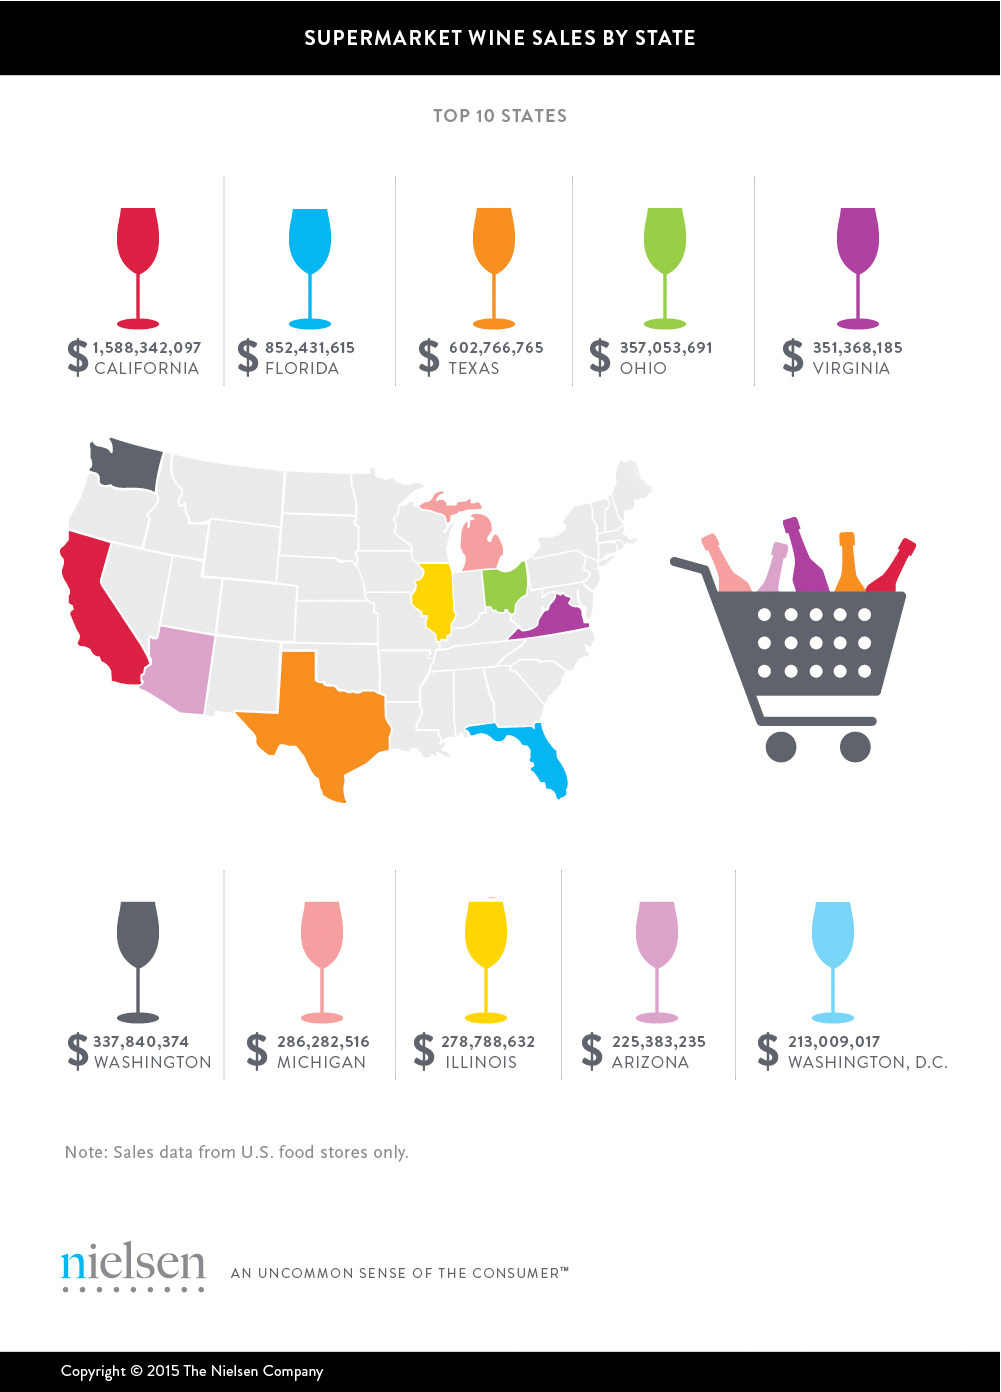 The Top 10 States For Supermarket Wine Sales